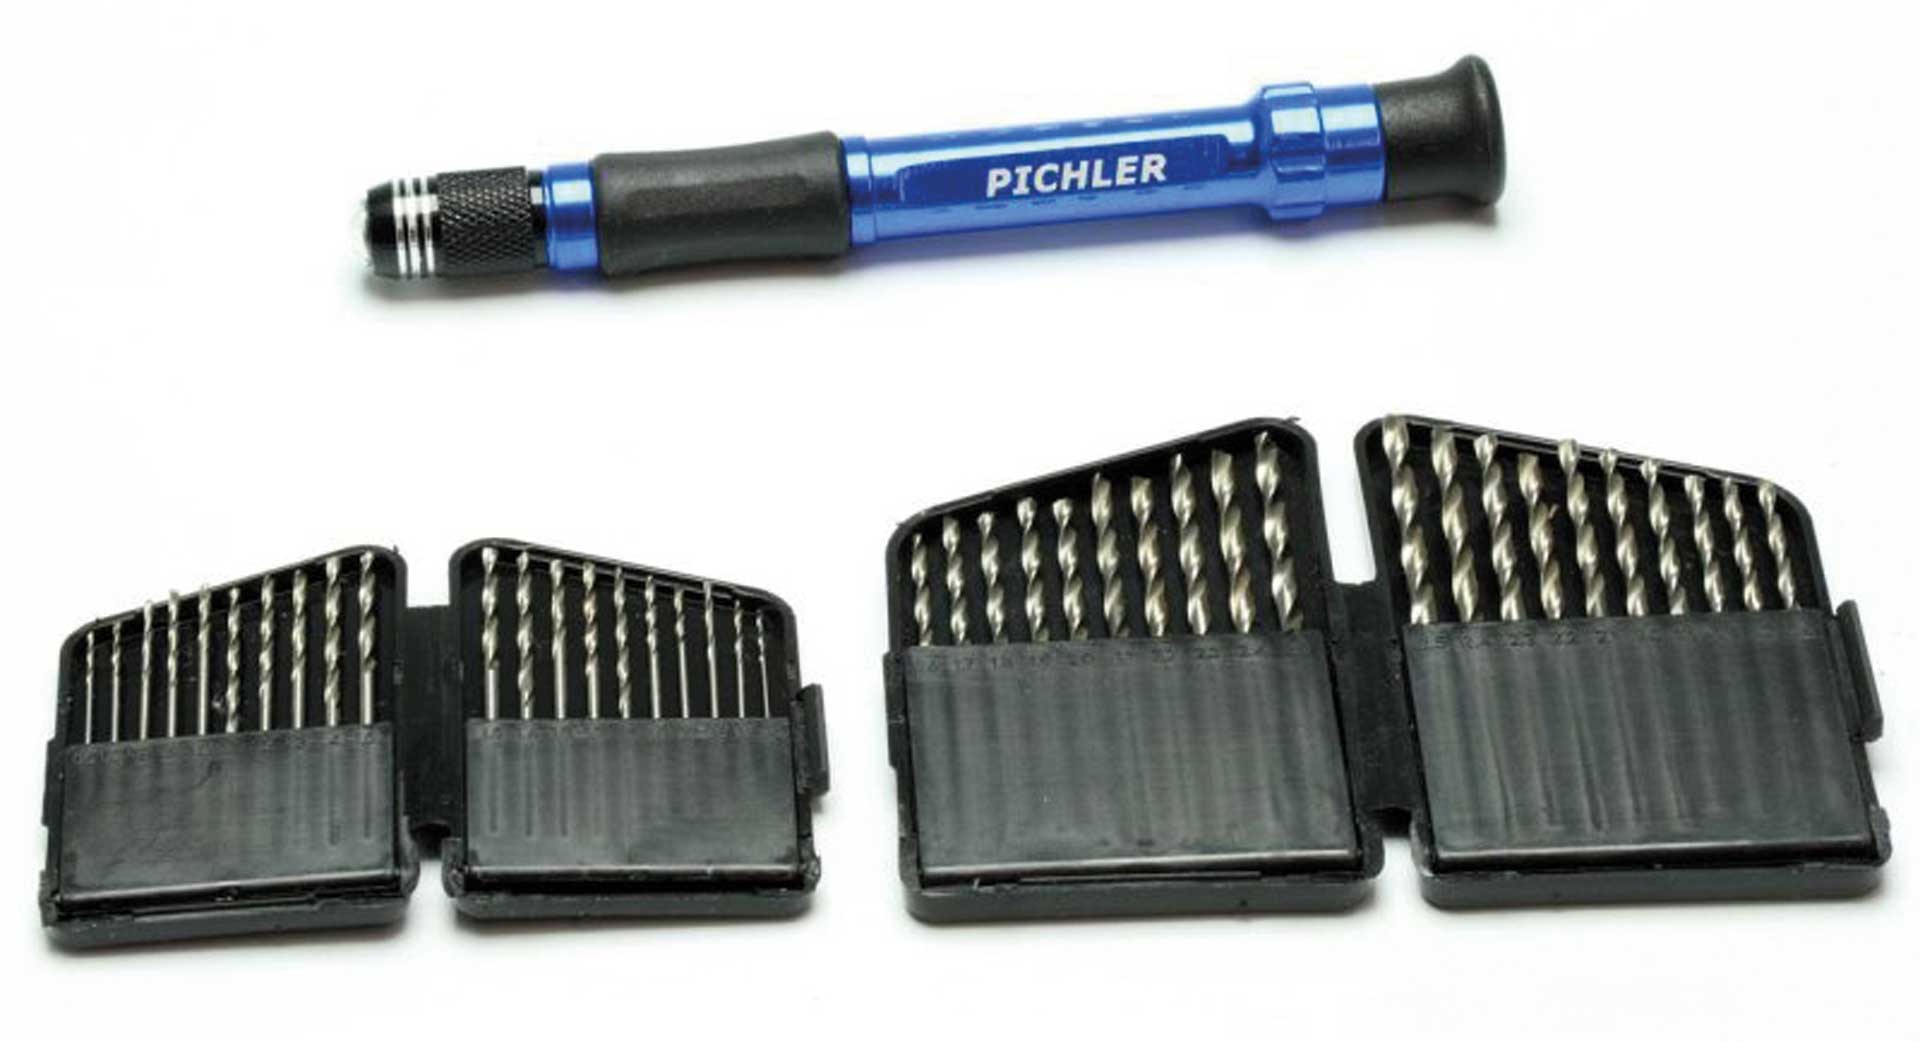 Pichler Drill set HSS with hand drill